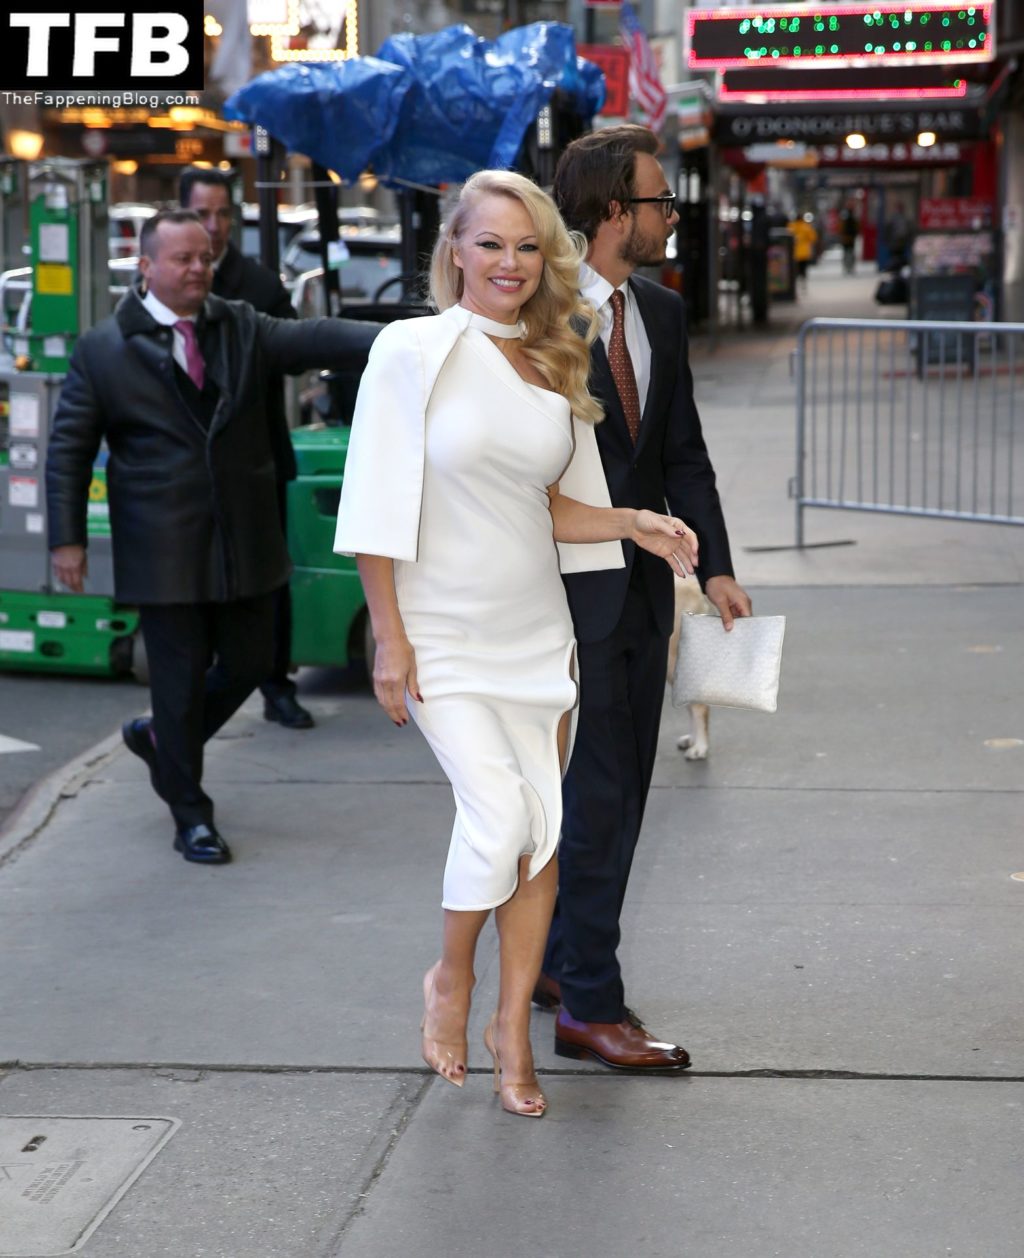 Pamela Anderson Sexy The Fappening Blog 50 1024x1258 - Pamela Anderson Heads to Good Morning America (107 Photos + Video)